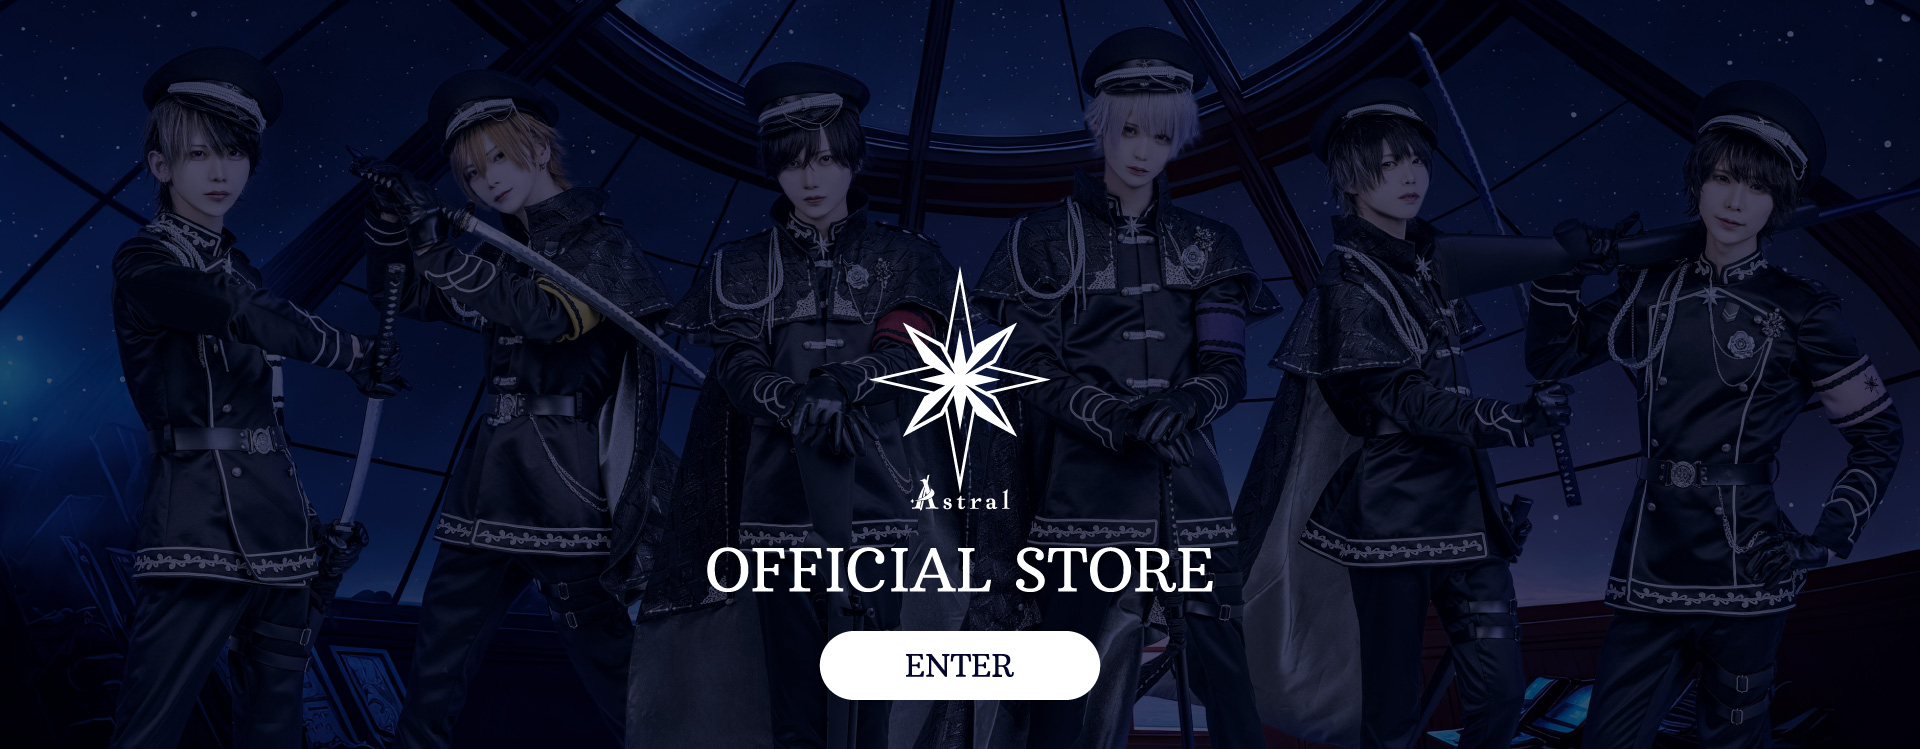 OFFICIAL STORE